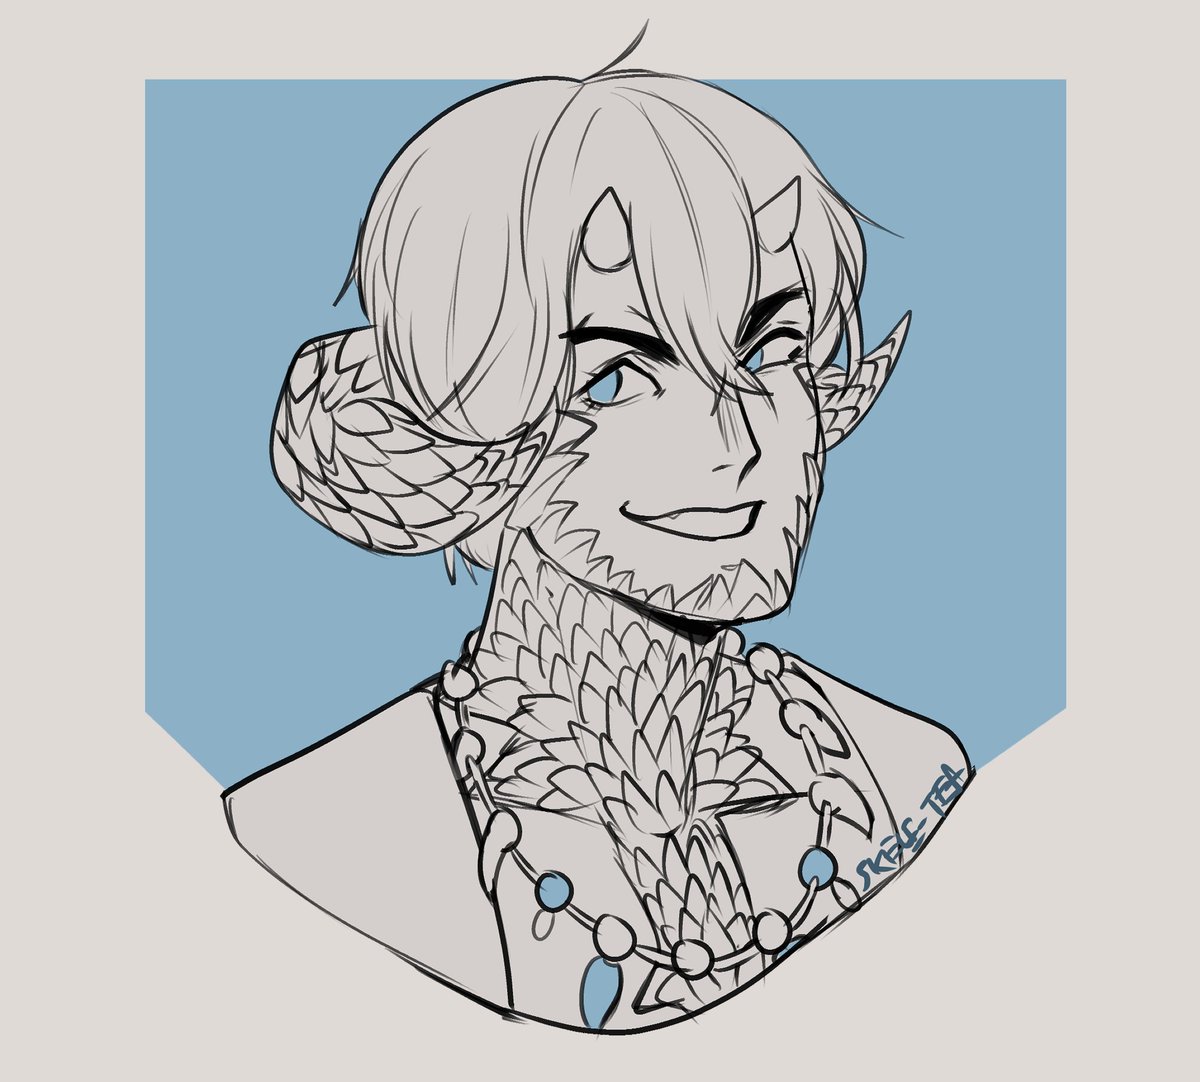 Continuing this thread with more patron bustsJanuary 2020 rewards for:  @LittleAppleBug , Nekopersona, Qunari, and Cattelle @ dA #artistsontwitter  #patreoncreator  #patreon